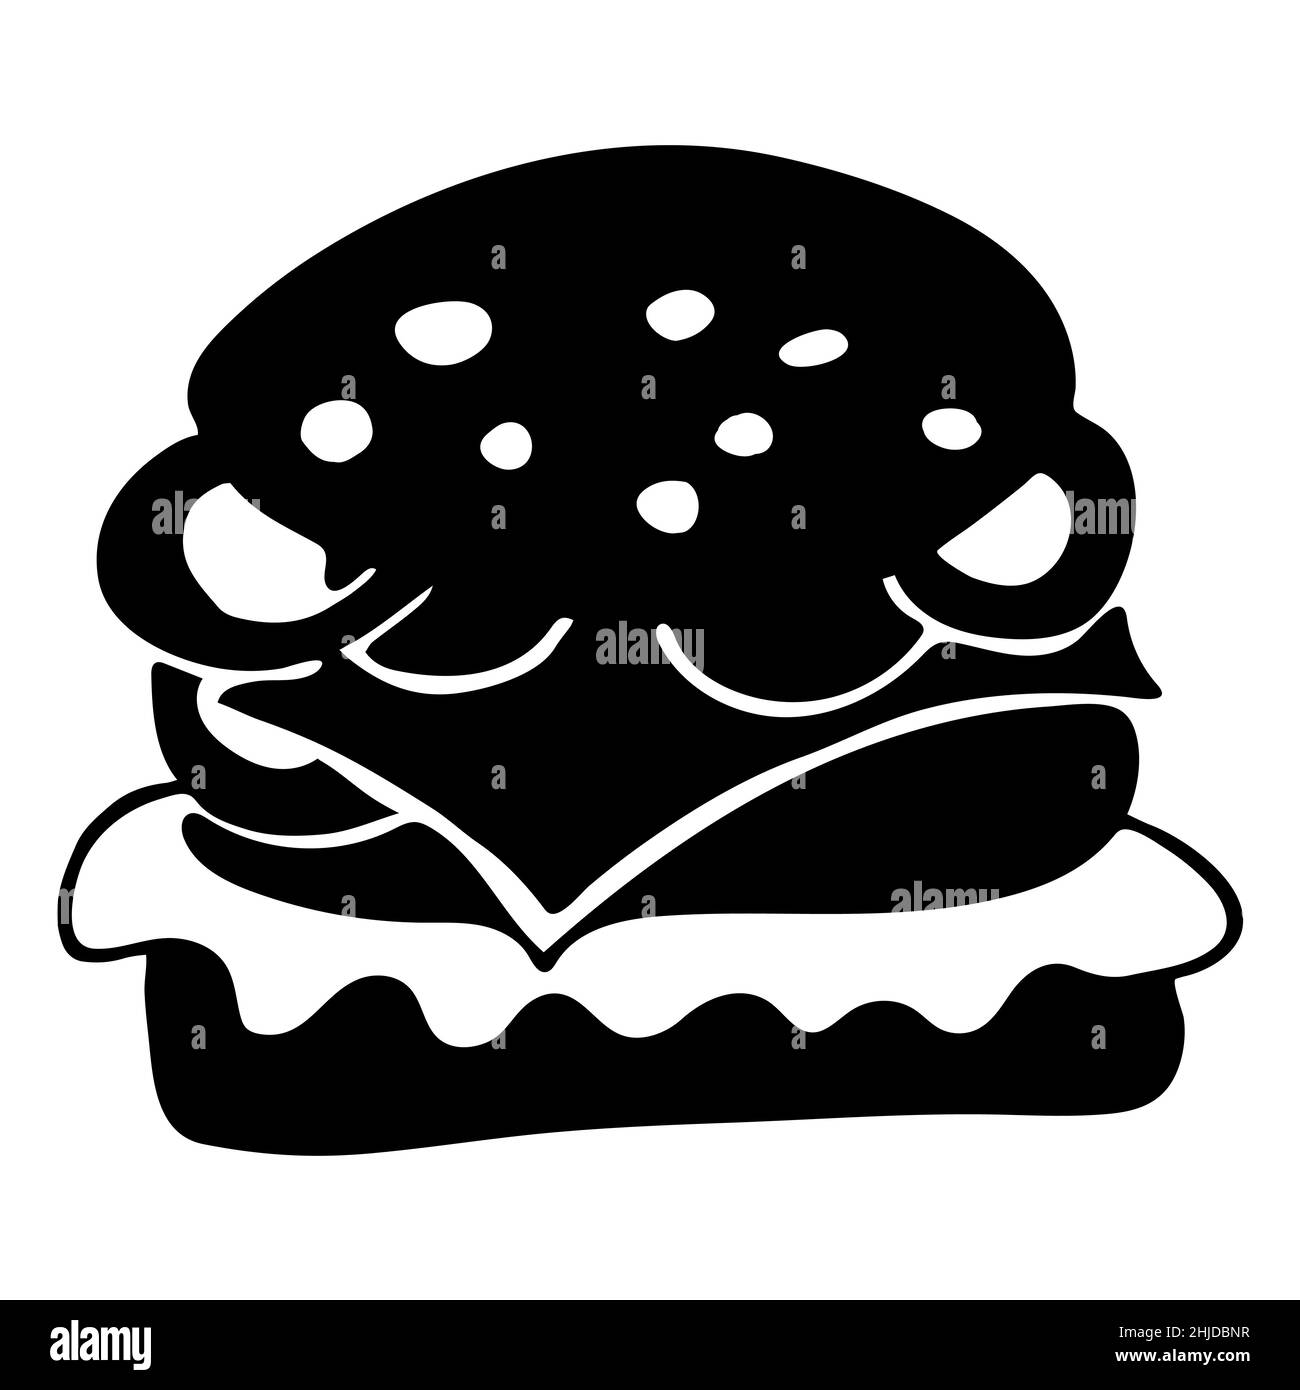 Isolate black and white illustration of burger. Icon or sign for eating, product or menu Stock Vector